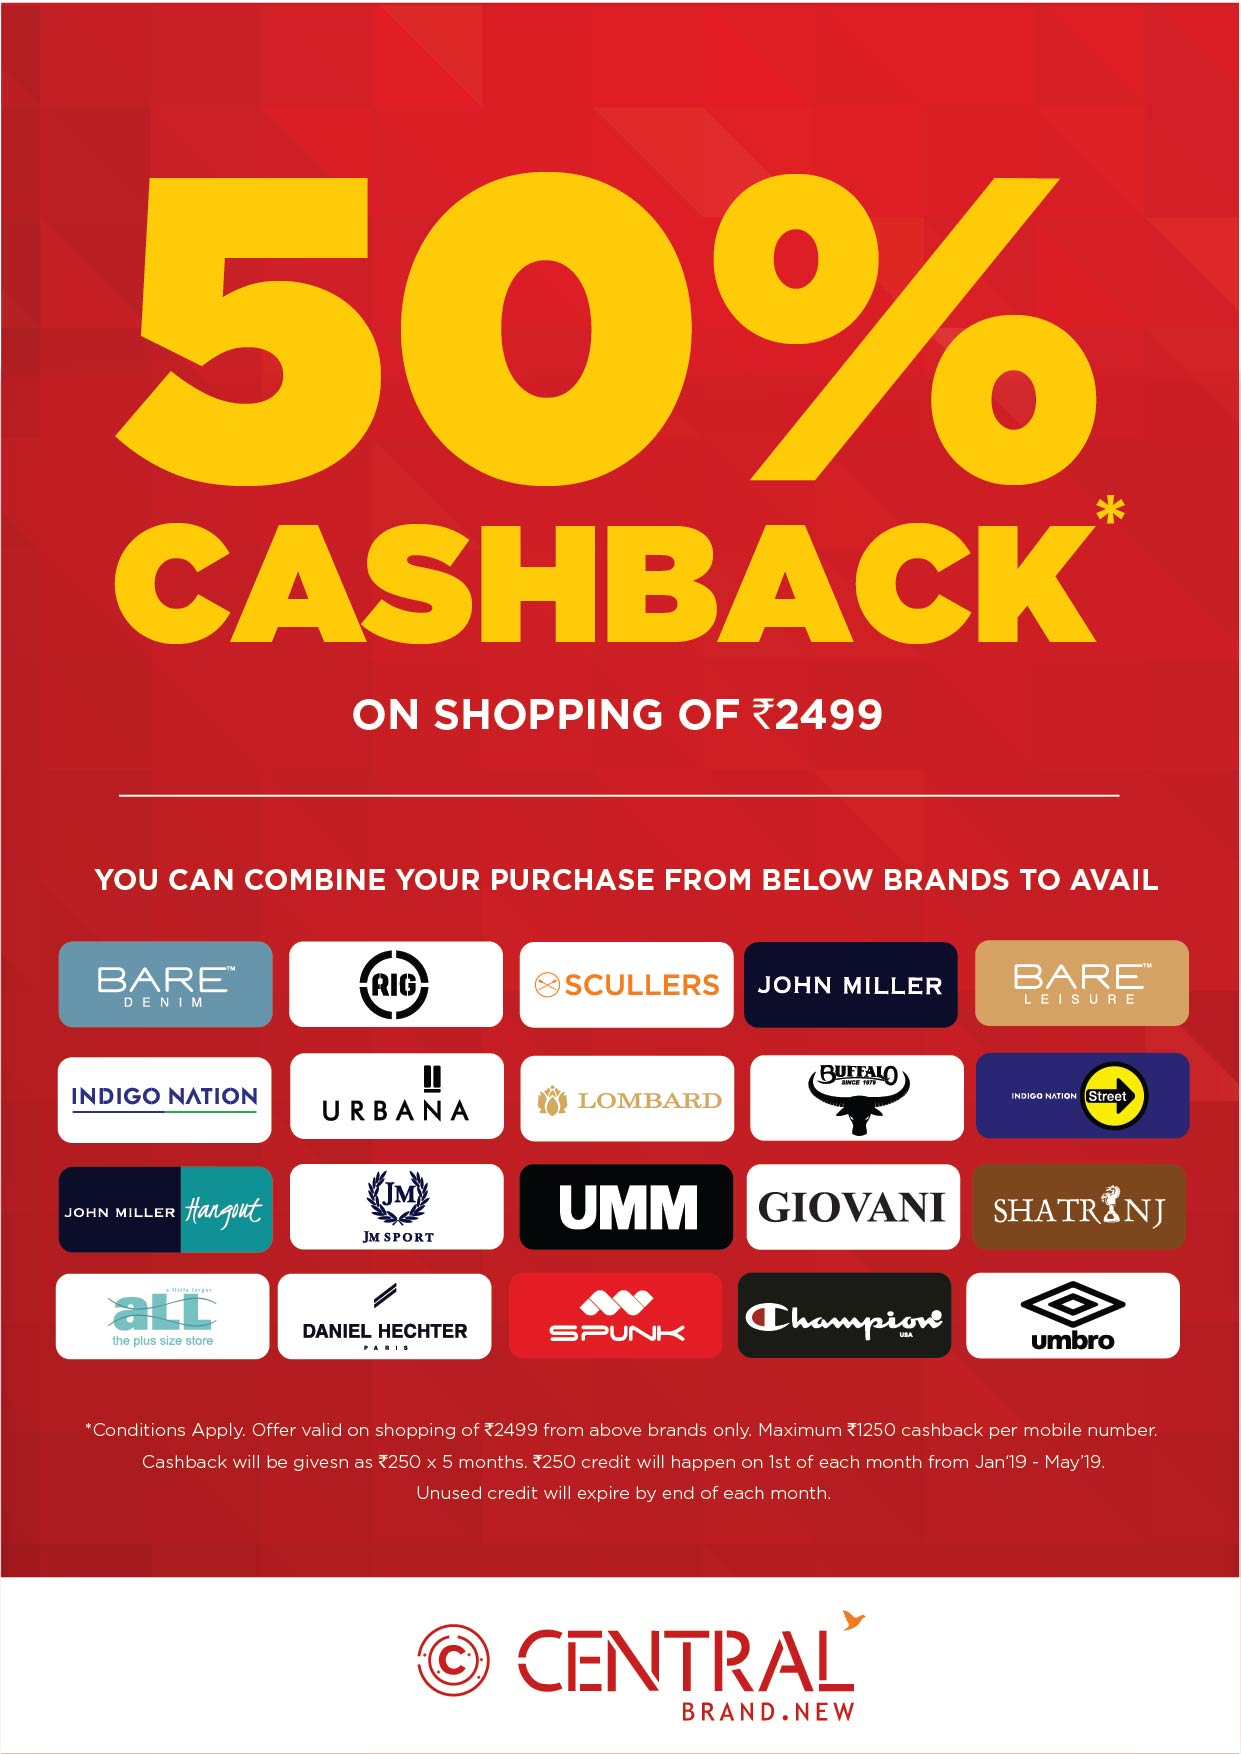 50% Cashback on Shopping of Rs.2499